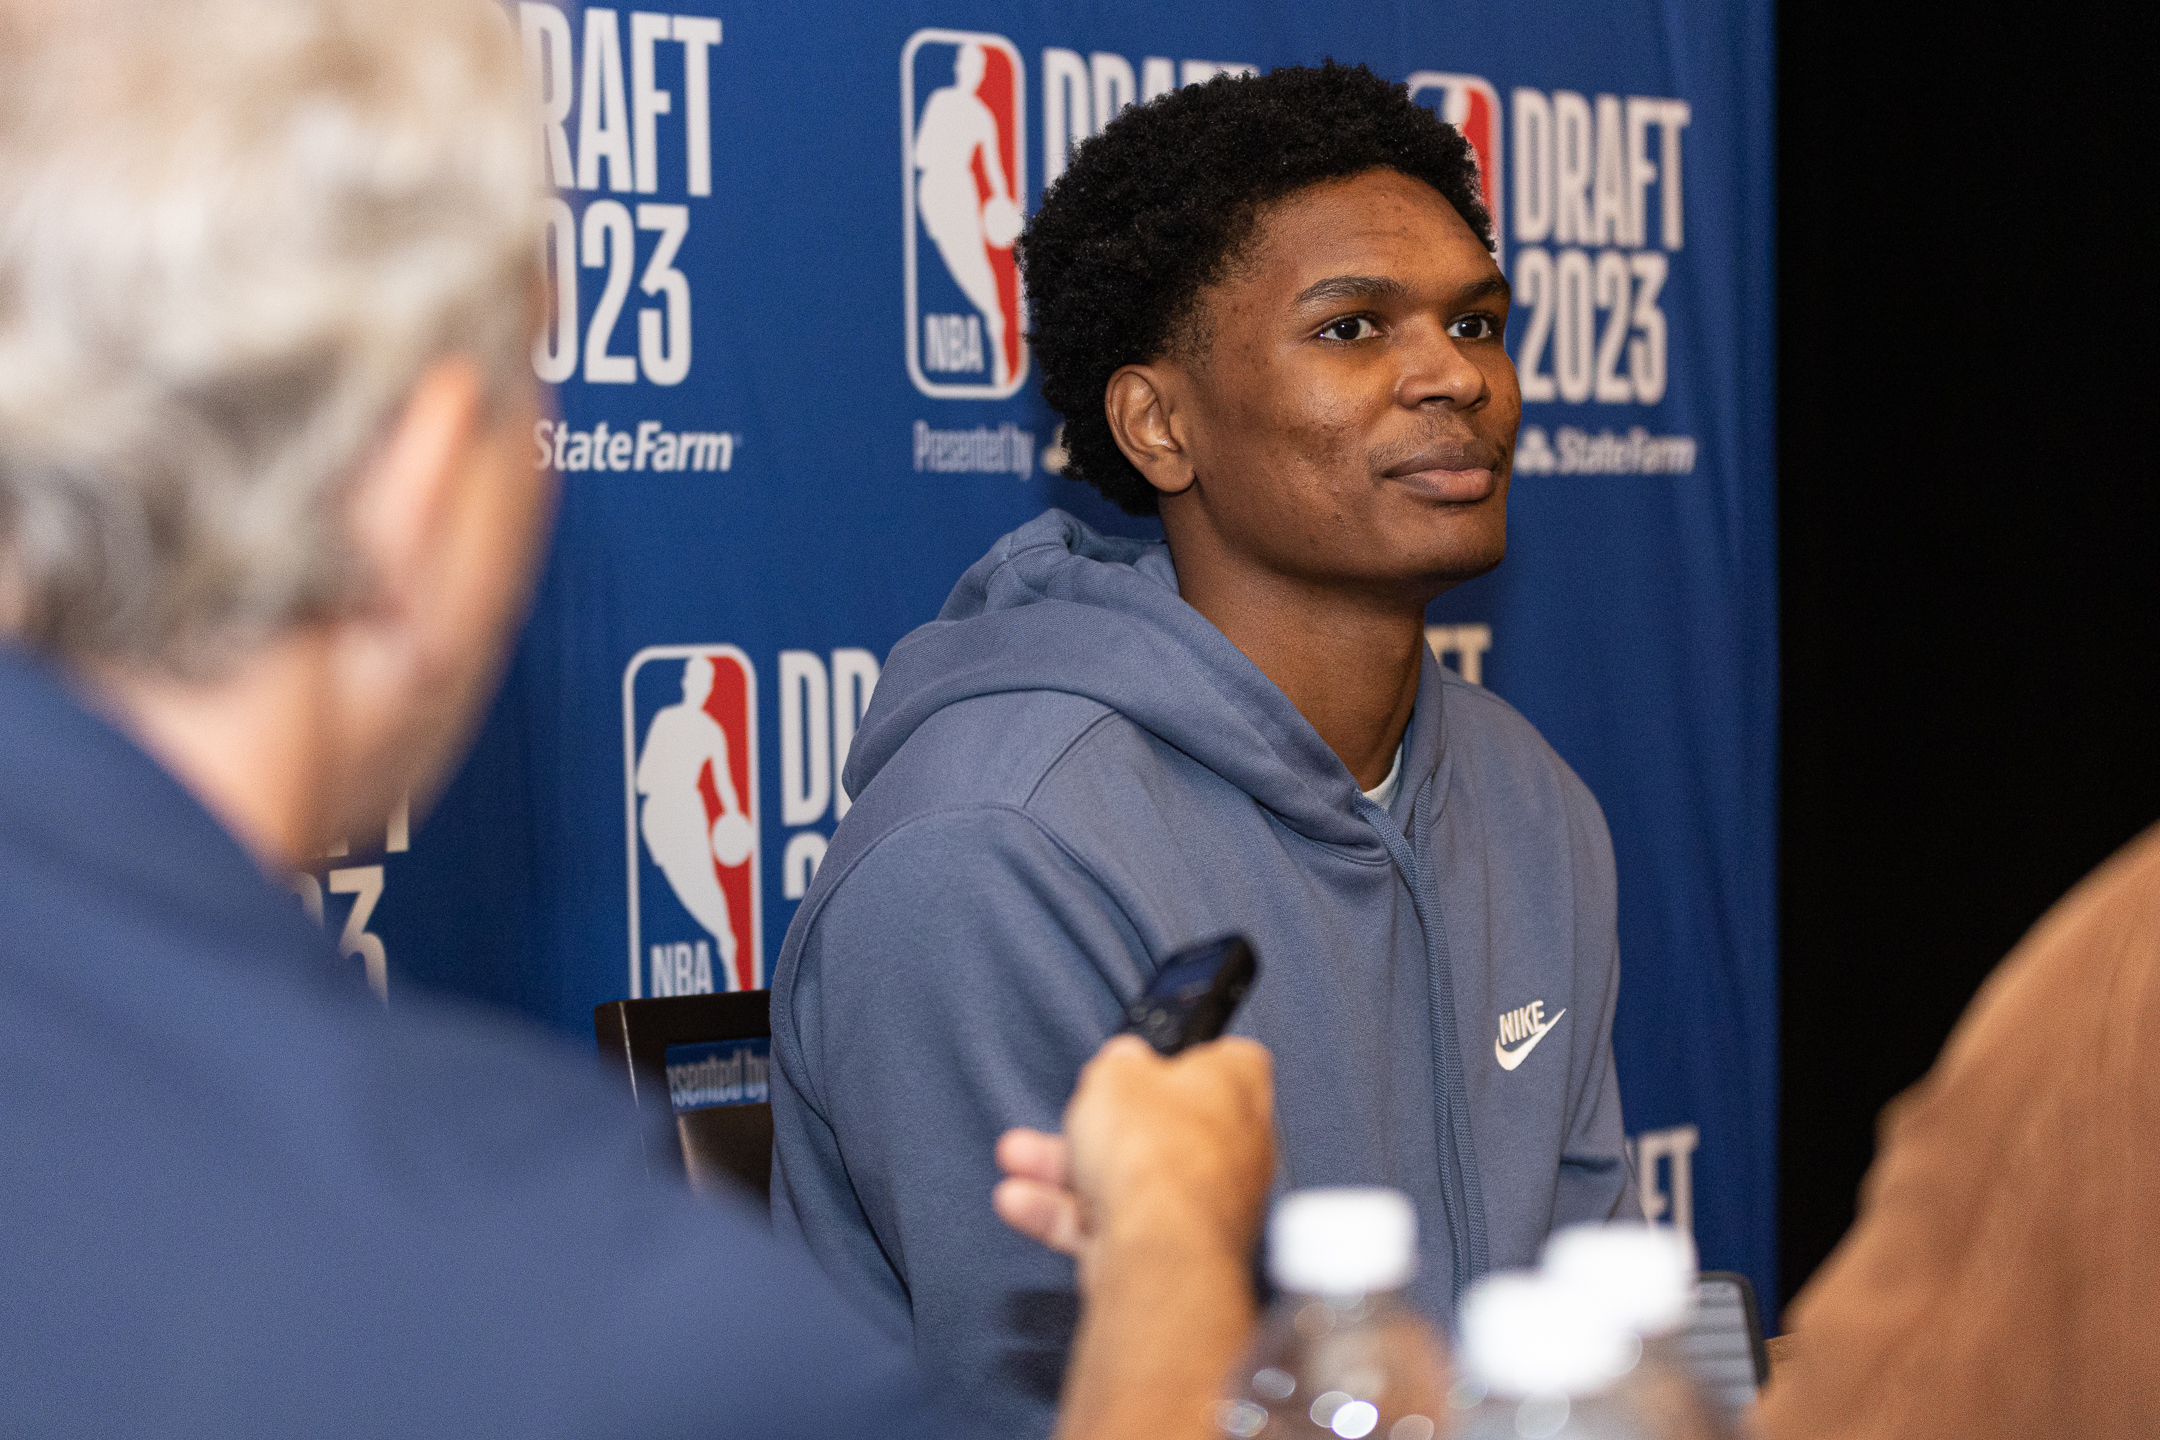 NEW YORK, NY - JUNE 21: NBA Draft Prospect, Ausar Thompson talks to the media during media availability and circuit as part of the 2023 NBA Draft on June 21, 2023 at the Westin Times Square in New York City.